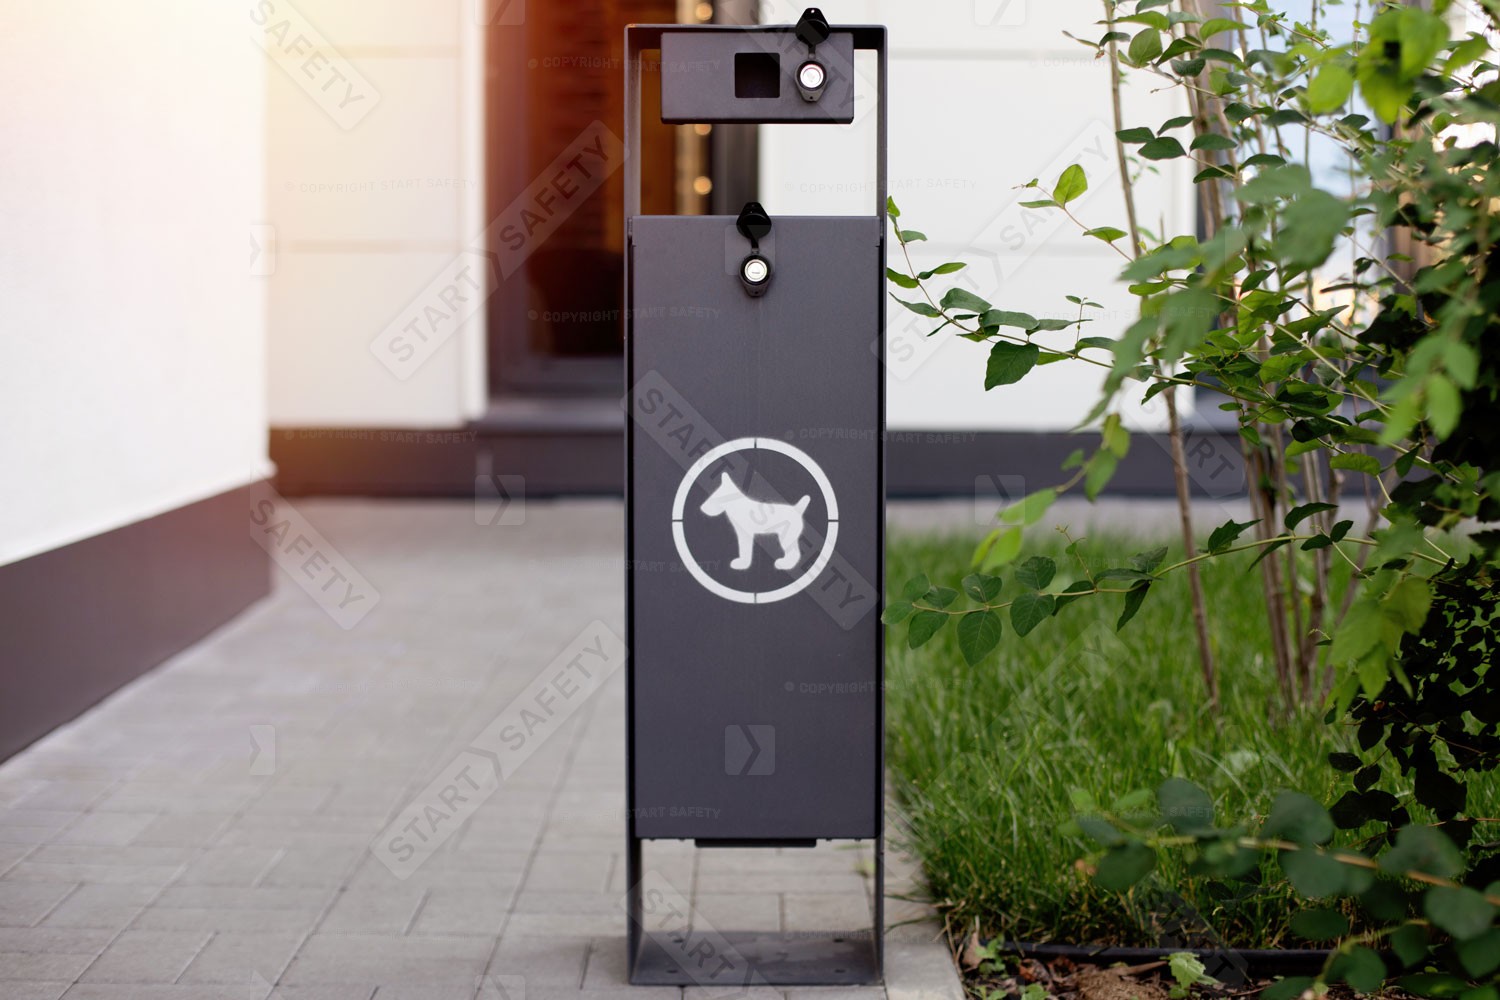 Fancy Dog Waste Bin Installed To Compliment Existing Street Furniture